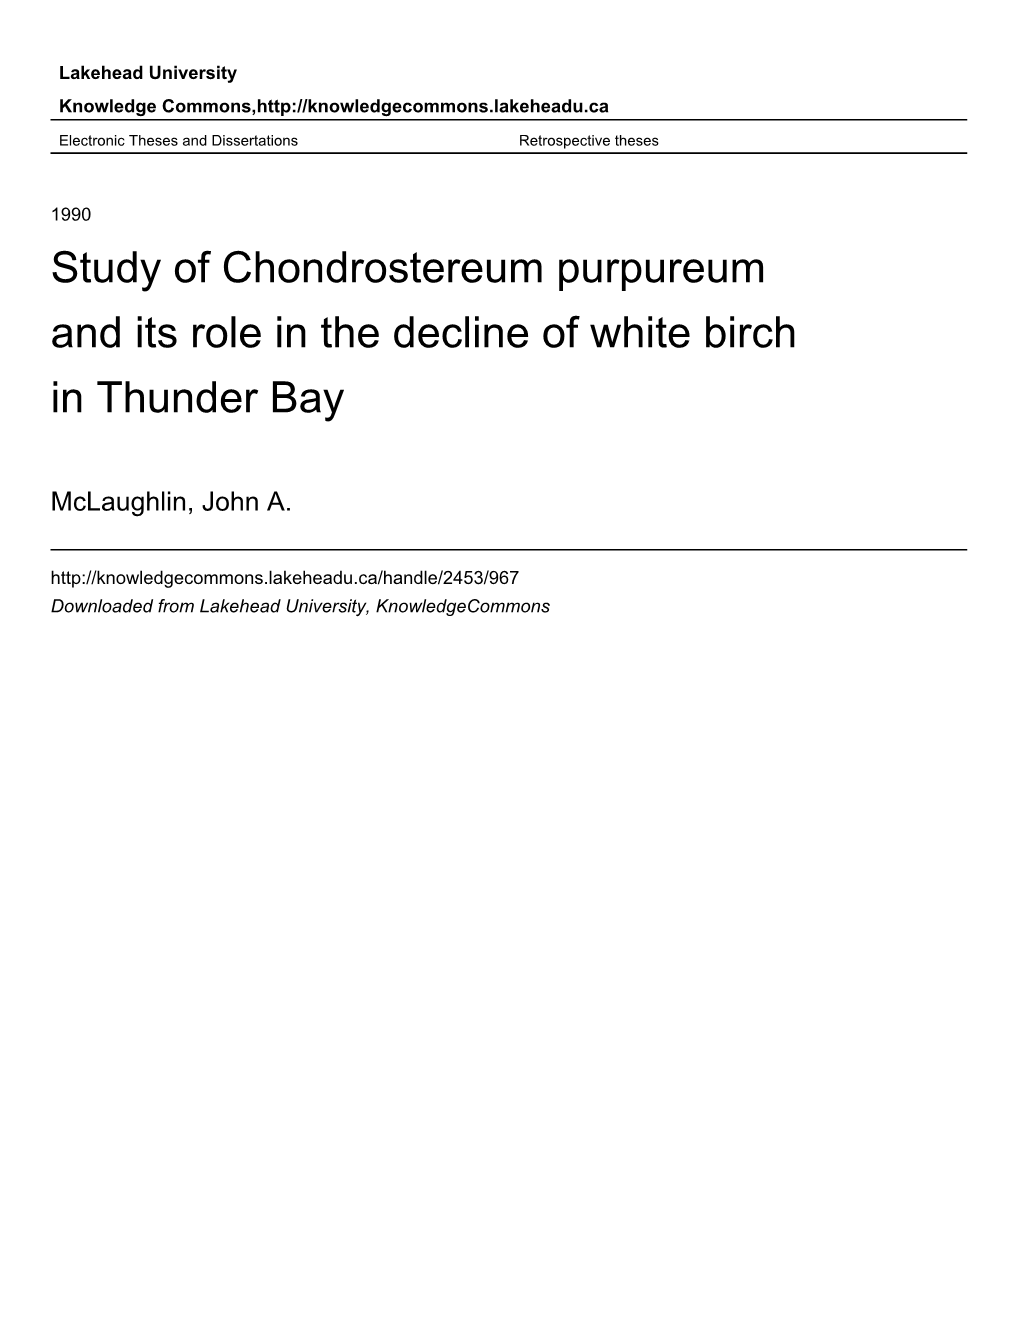 Study of Chondrostereum Purpureum and Its Role in the Decline of White Birch in Thunder Bay